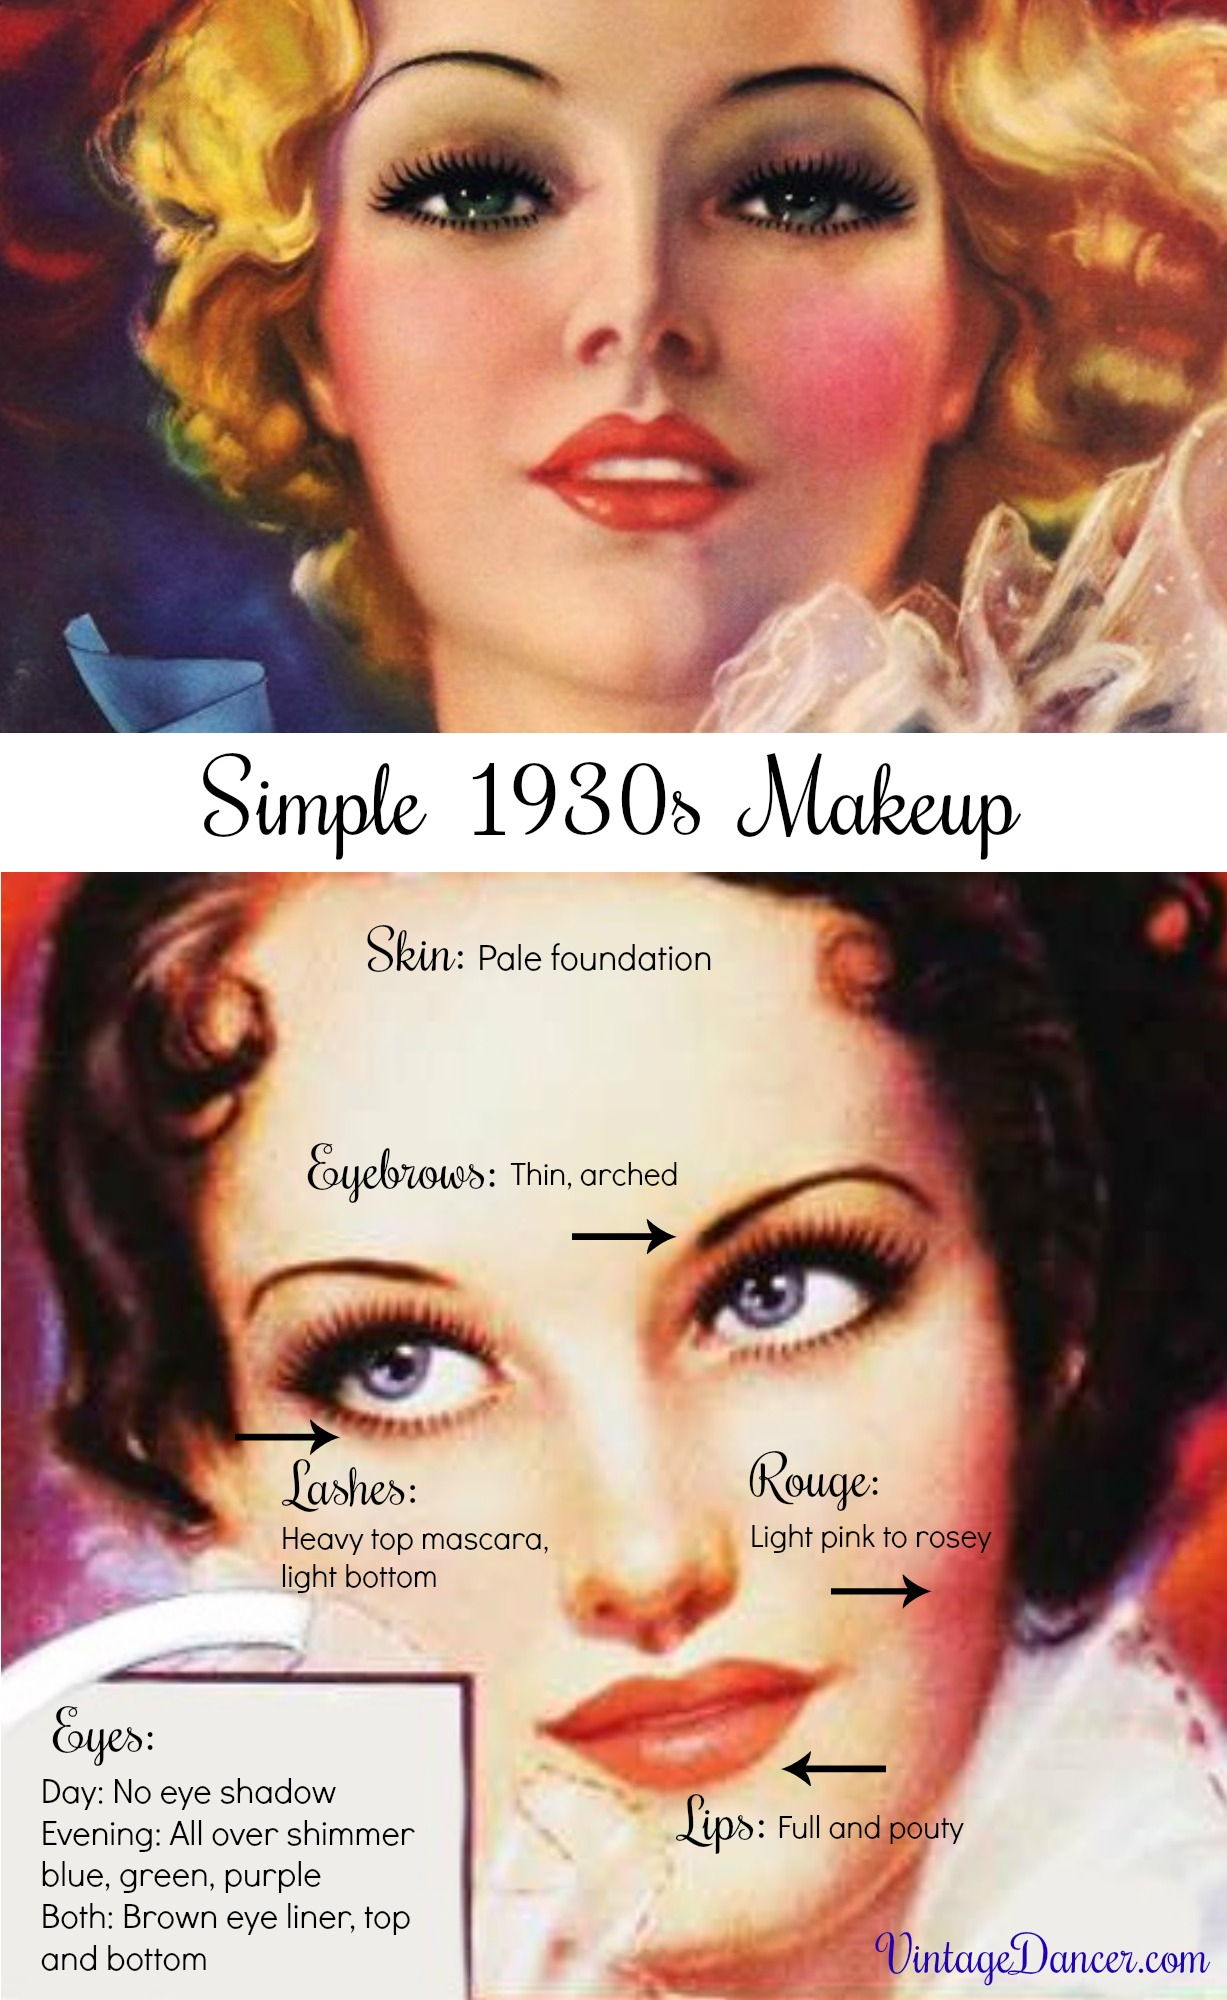 Makeup For Pale Skin Brown Eyes Simple Natural 1930s Makeup Guide